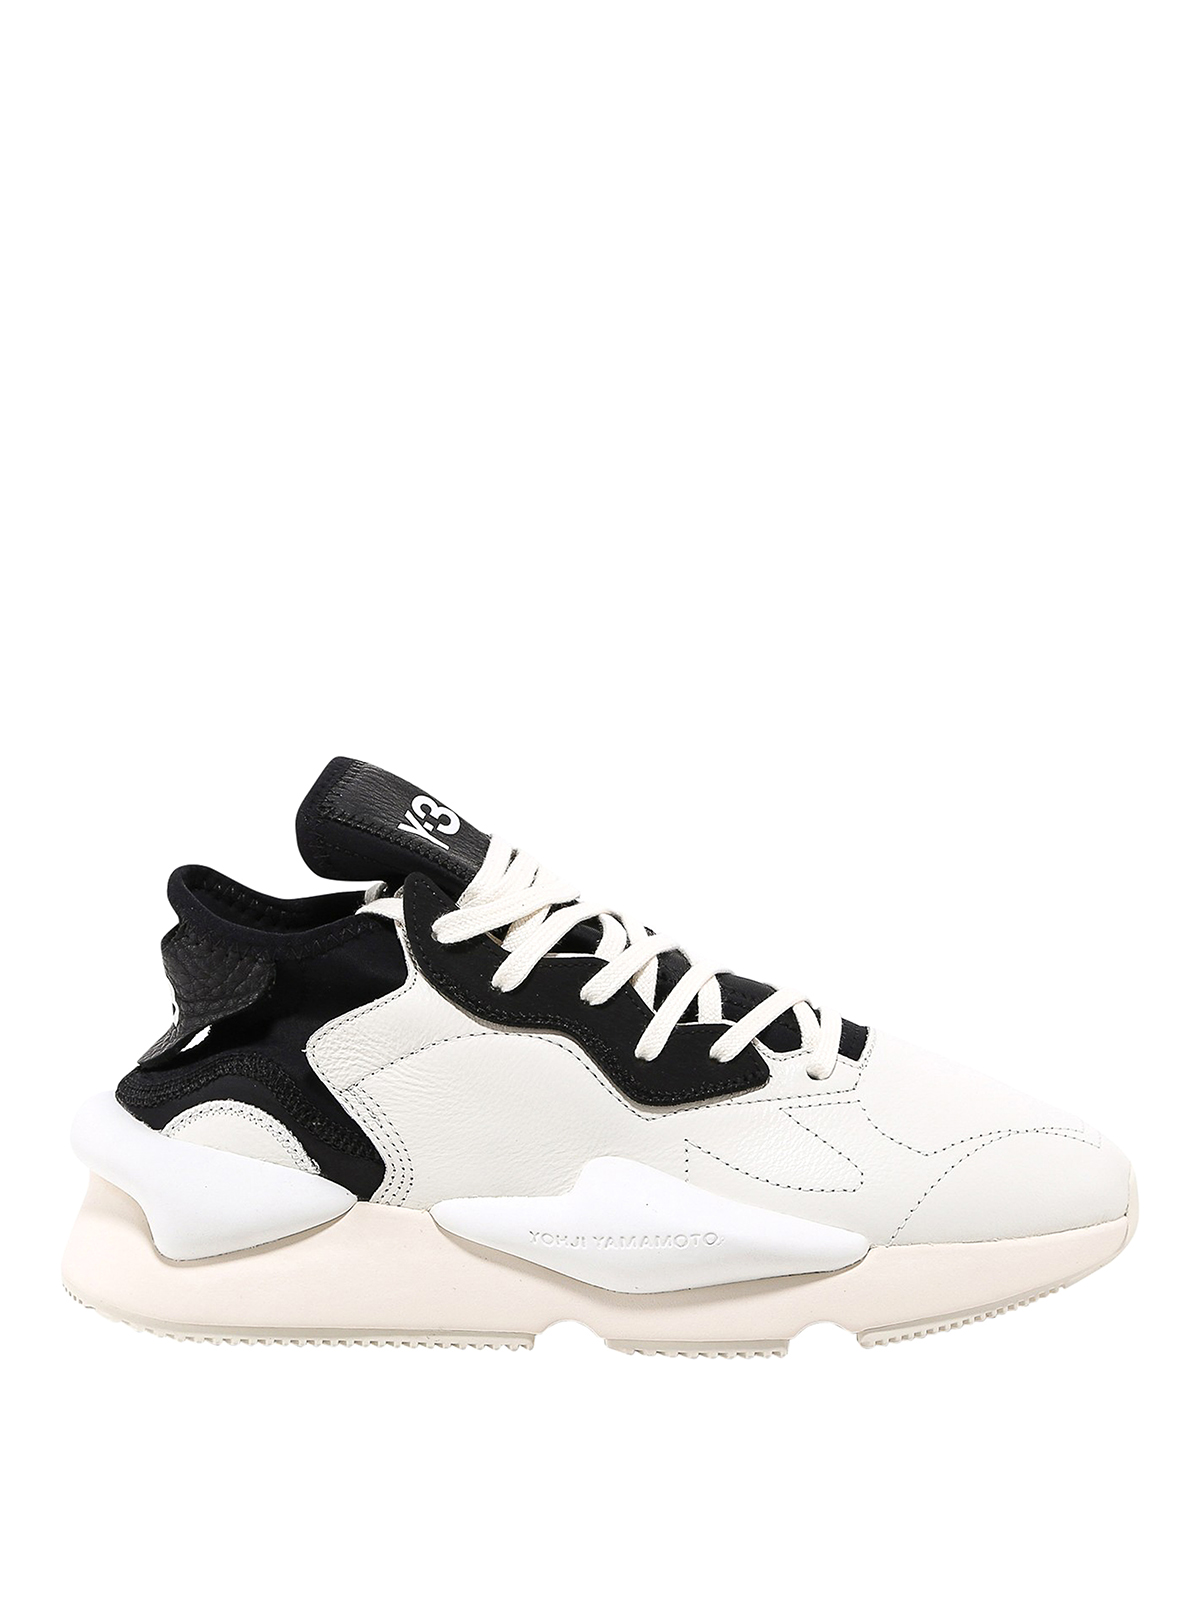 Trainers Y-3 - Kaiwa sneakers - FZ4326 | Shop online at iKRIX